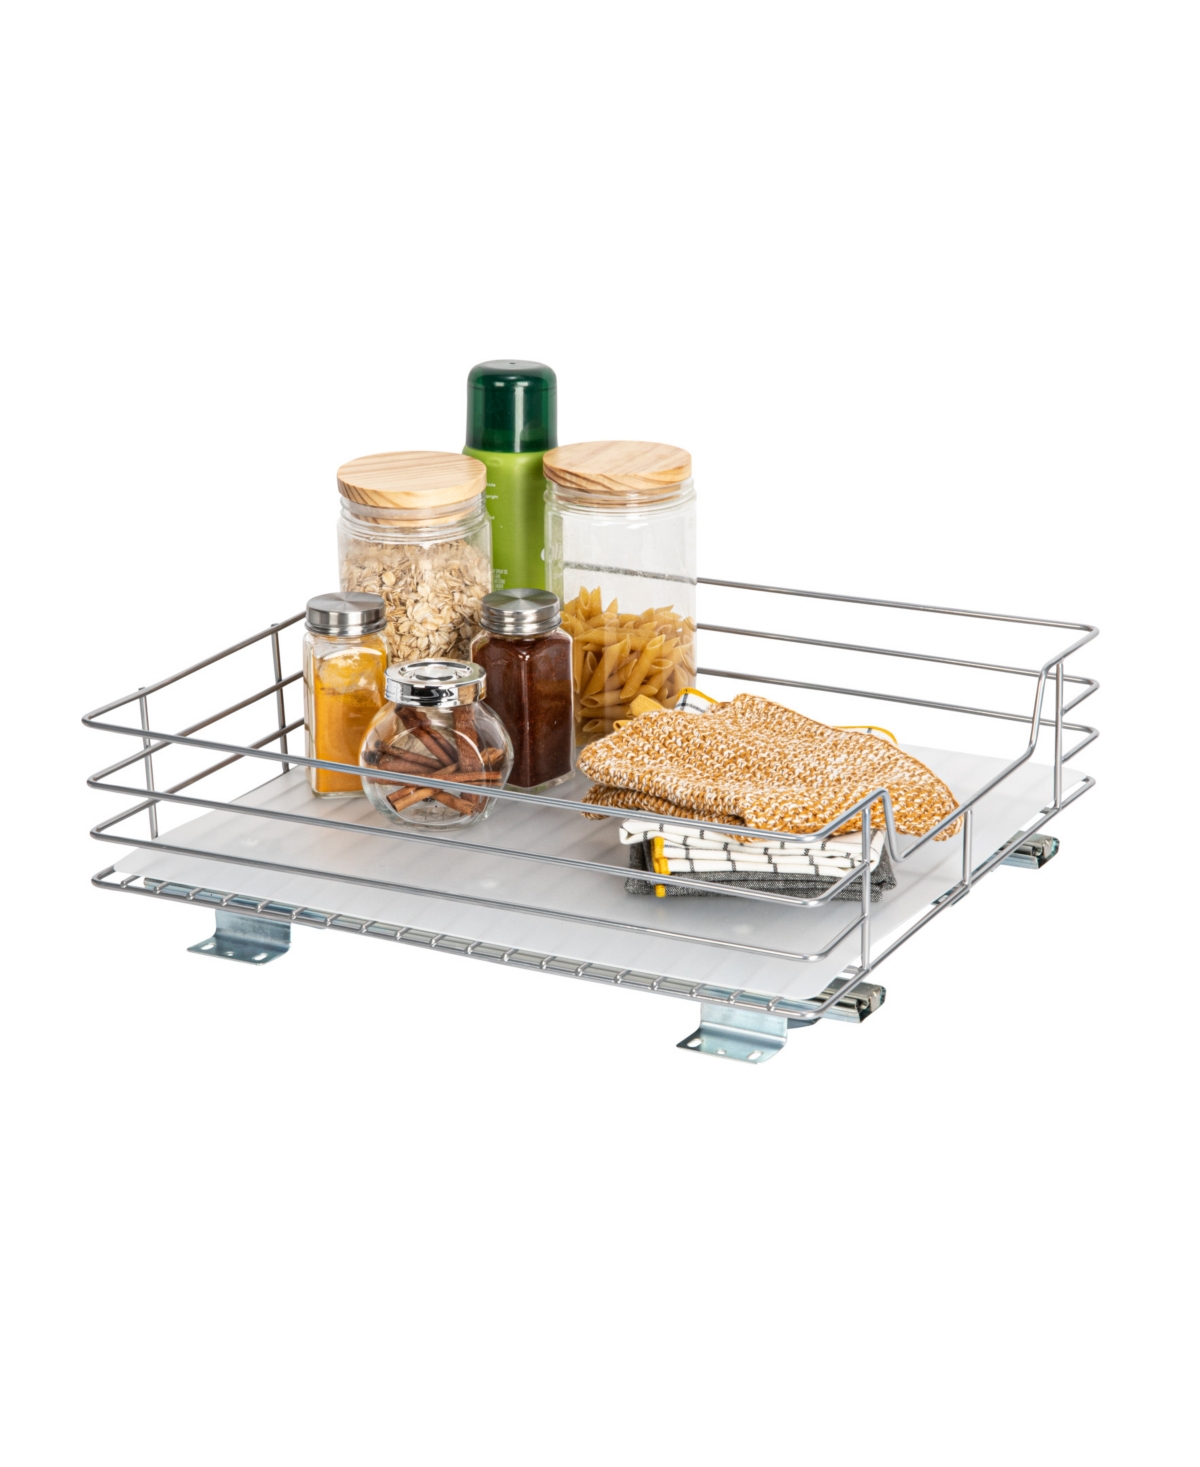 Glidez Steel Pull-Out/Slide-Out Storage Organizer with Plastic Liner for Under Cabinet or Wire Shelf Use 1-Tier Design - Silver